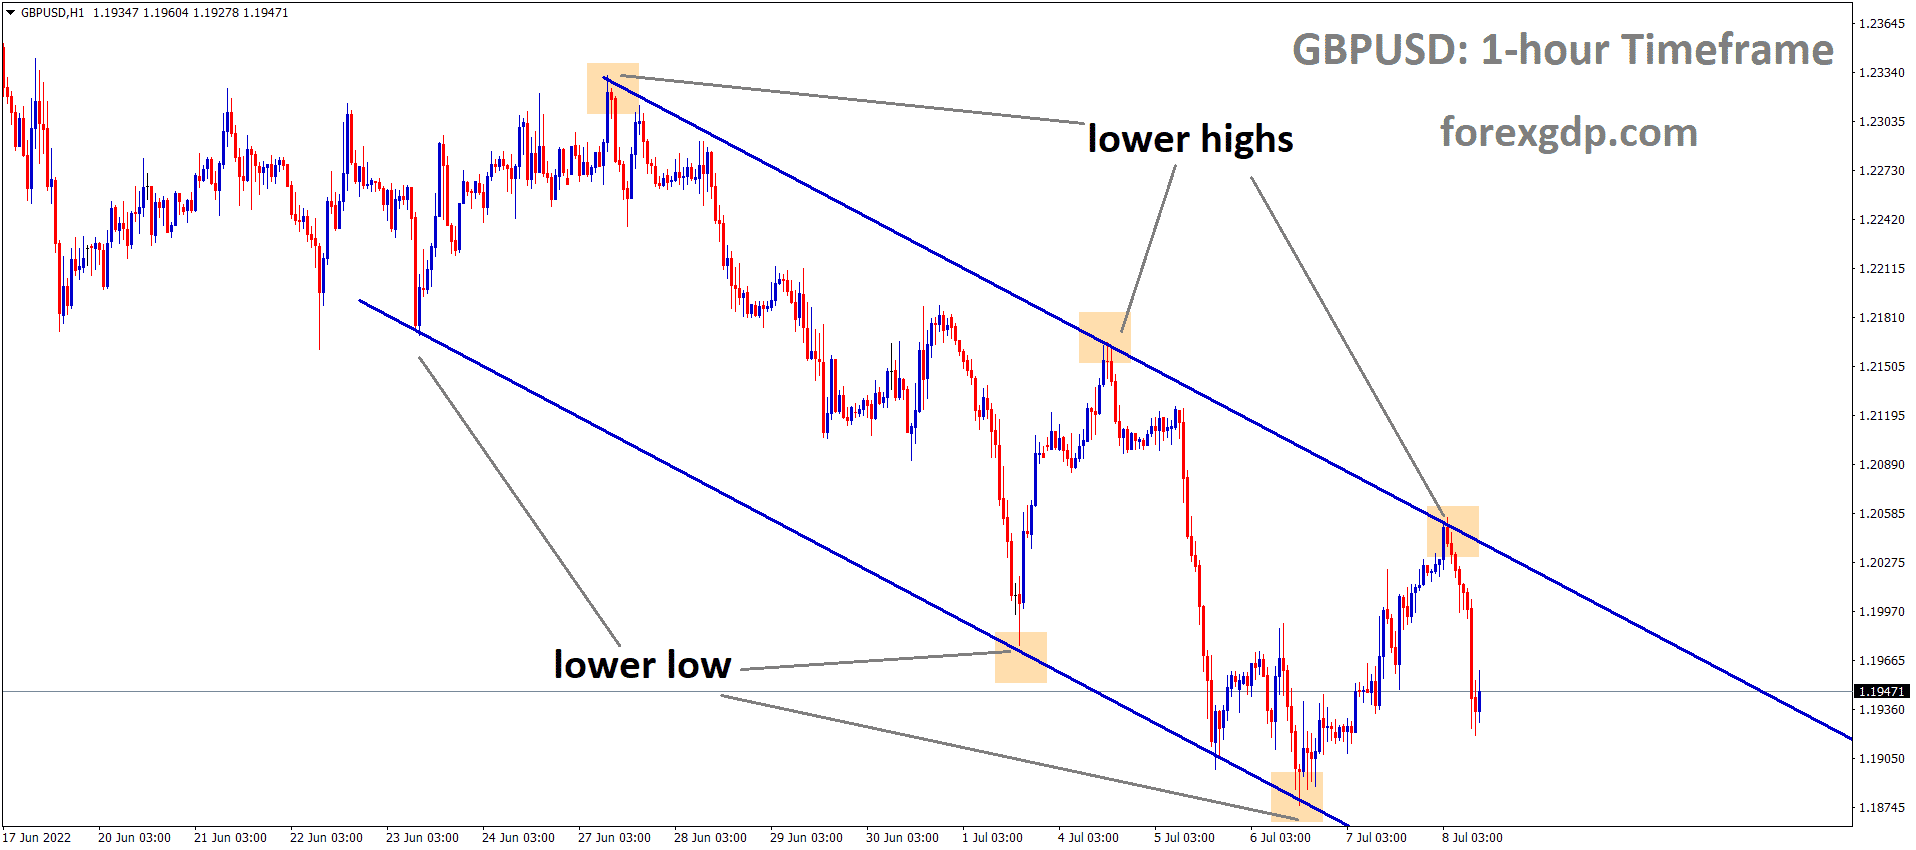 GBPUSD is moving in the Descending channel and the Market has Fallen from the Lower high area of the channel